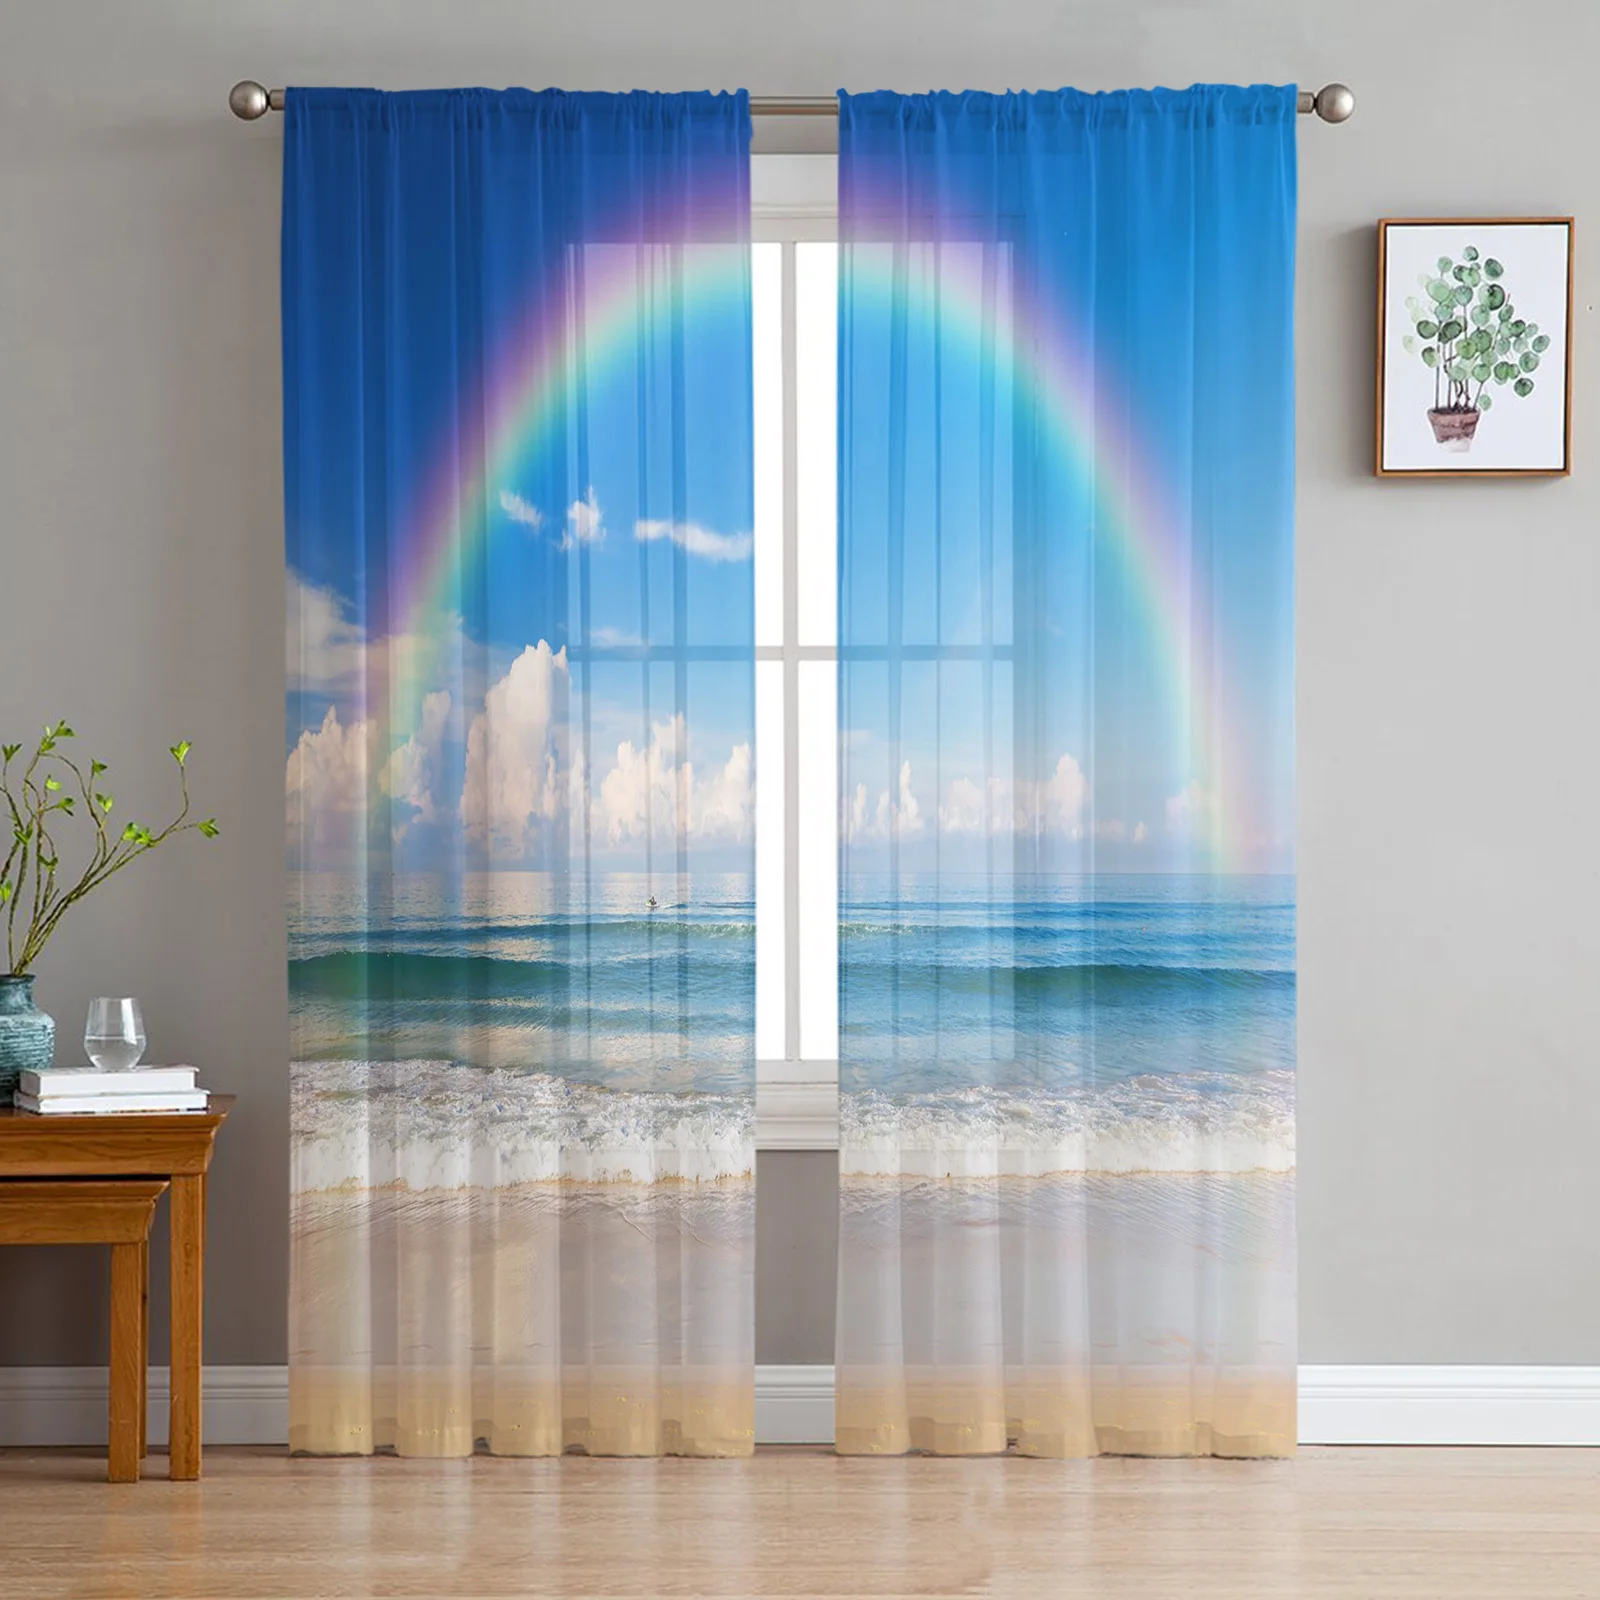 Rainbow Seaside Beach Voile Sheer Curtain for Living Room Coffee Hotel Tulle Drapes Window Home Decor Bedroom Curtains